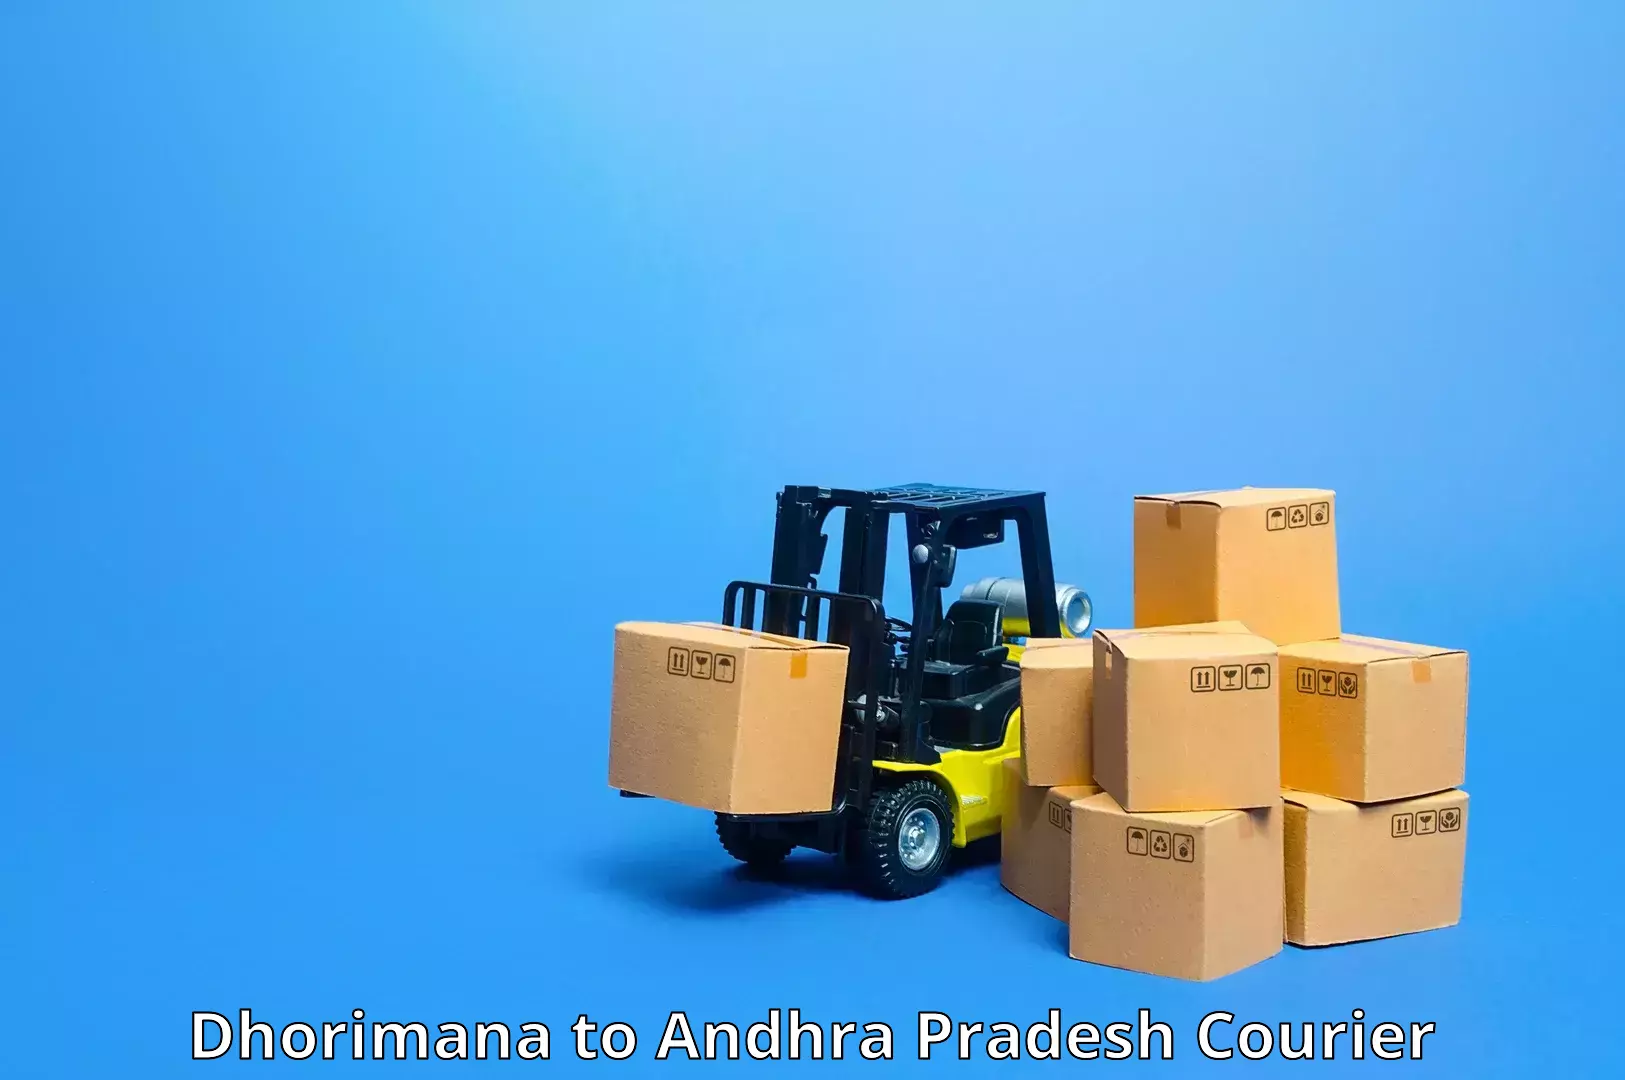 Efficient order fulfillment in Dhorimana to Bhattiprolu